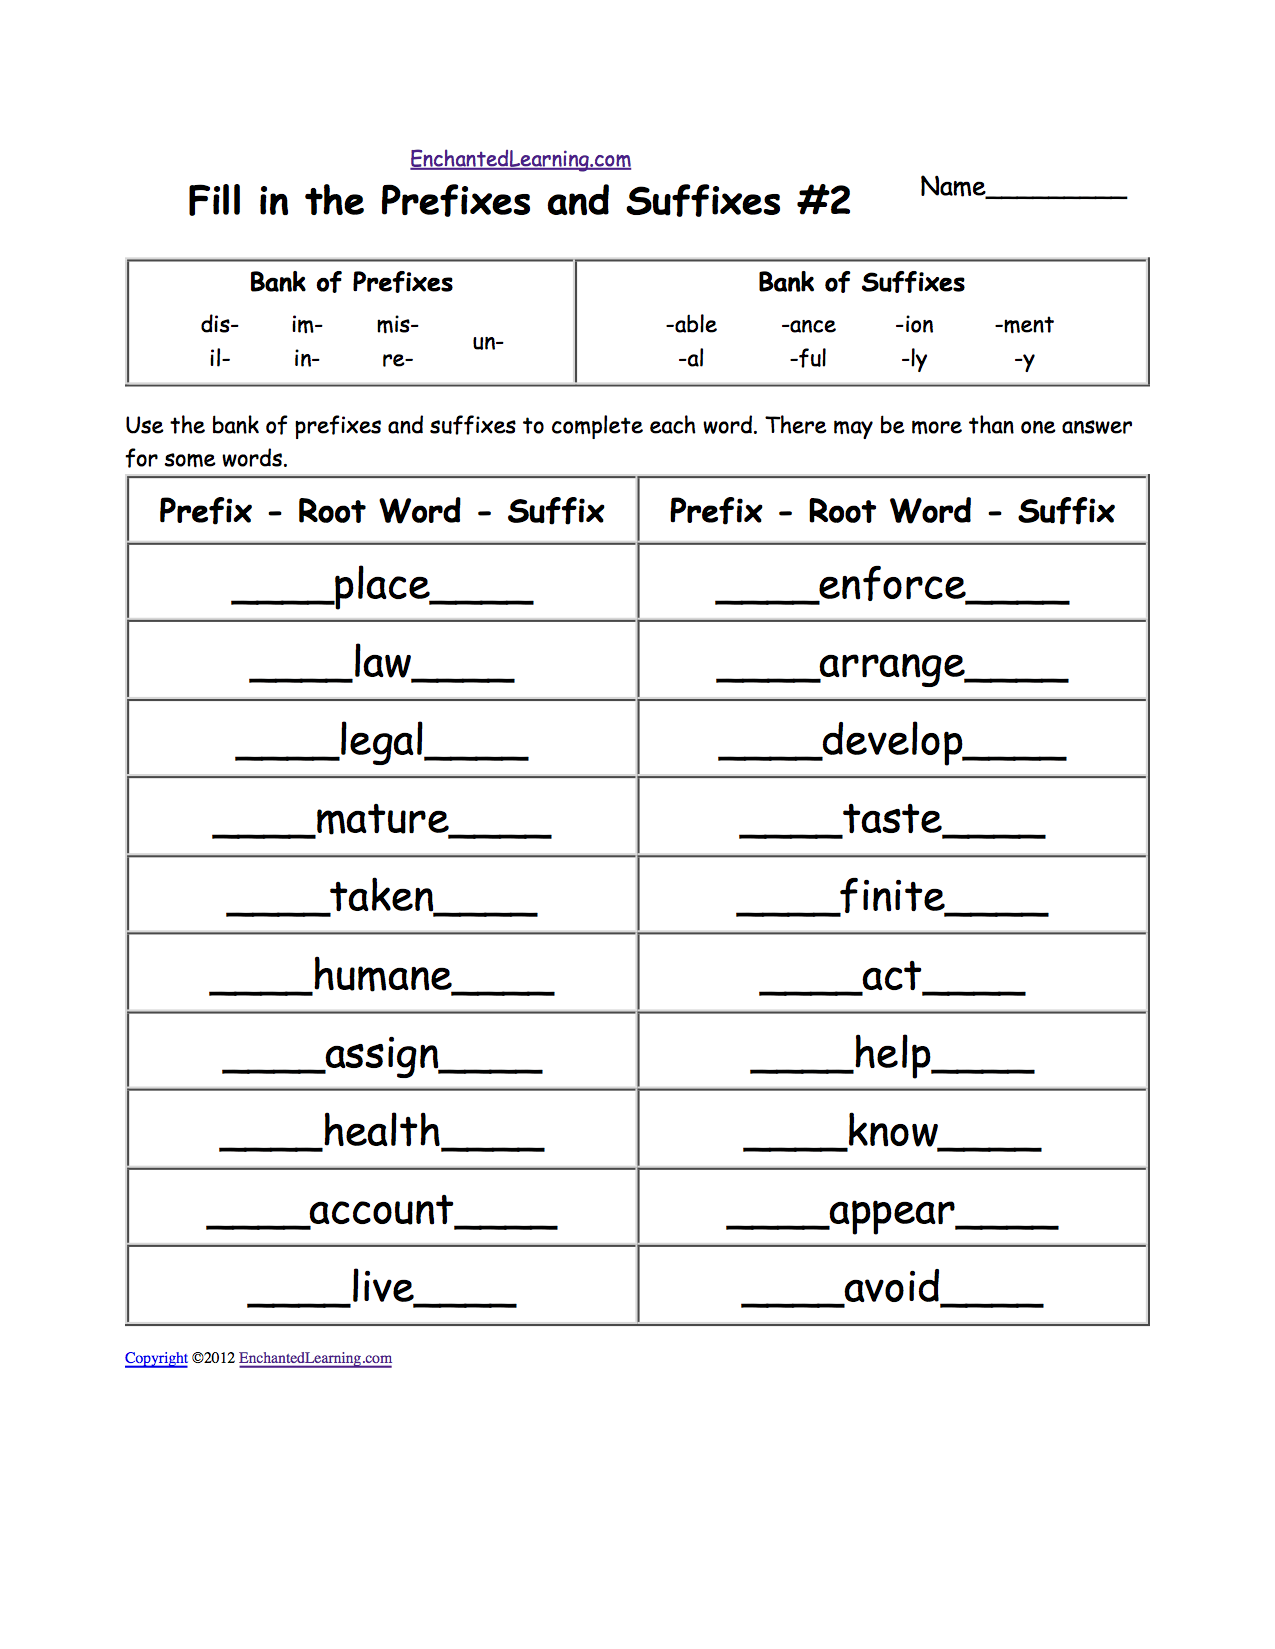 Prefixes and Suffixes - Enchanted Learning Regarding Prefixes And Suffixes Worksheet